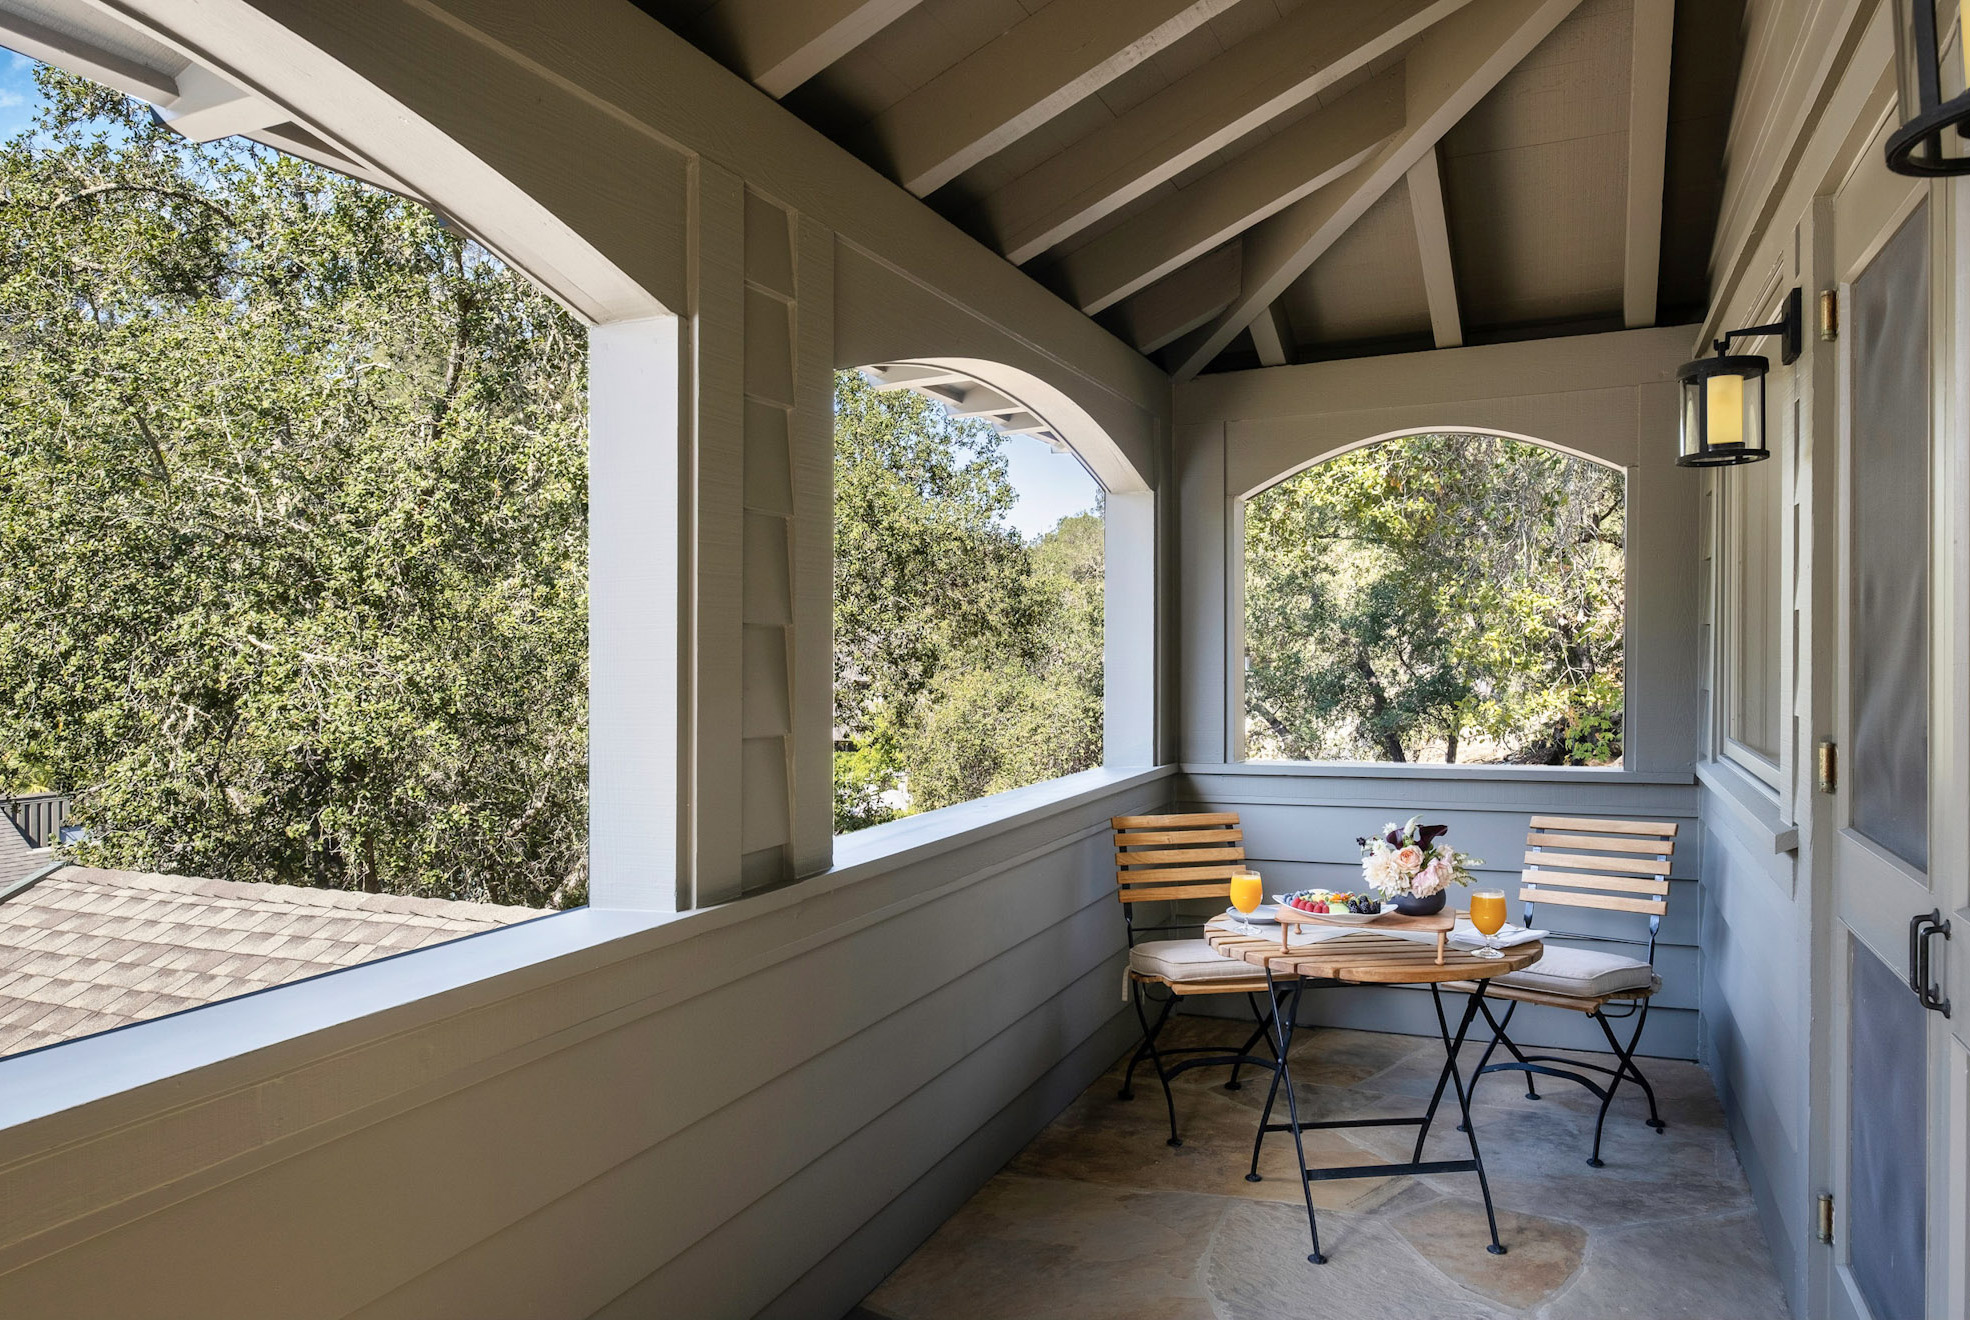 Cottage Room with al fresco dining on private porch